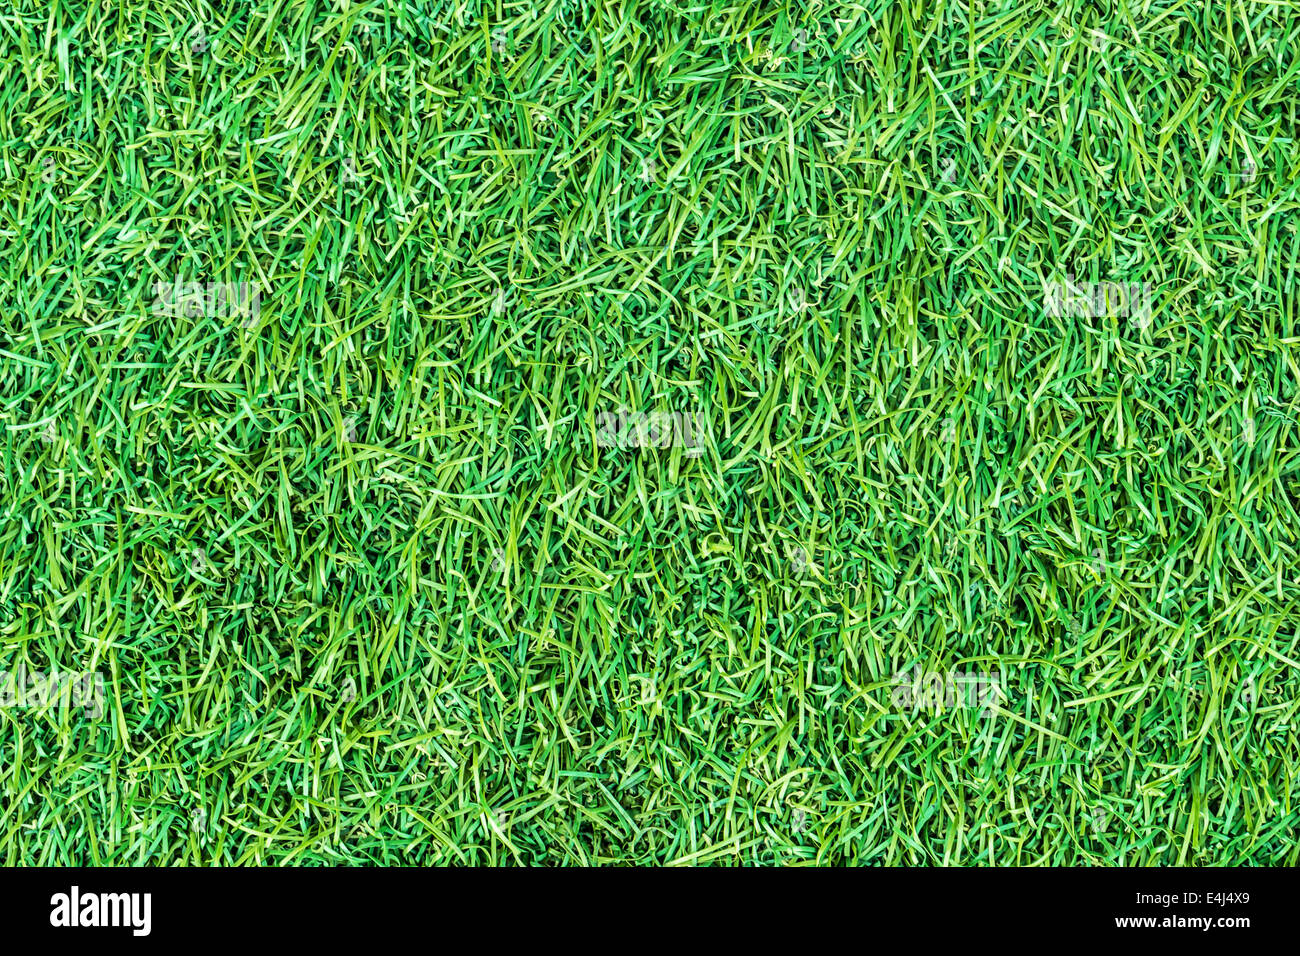 Green artificial turf texture for background. Stock Photo